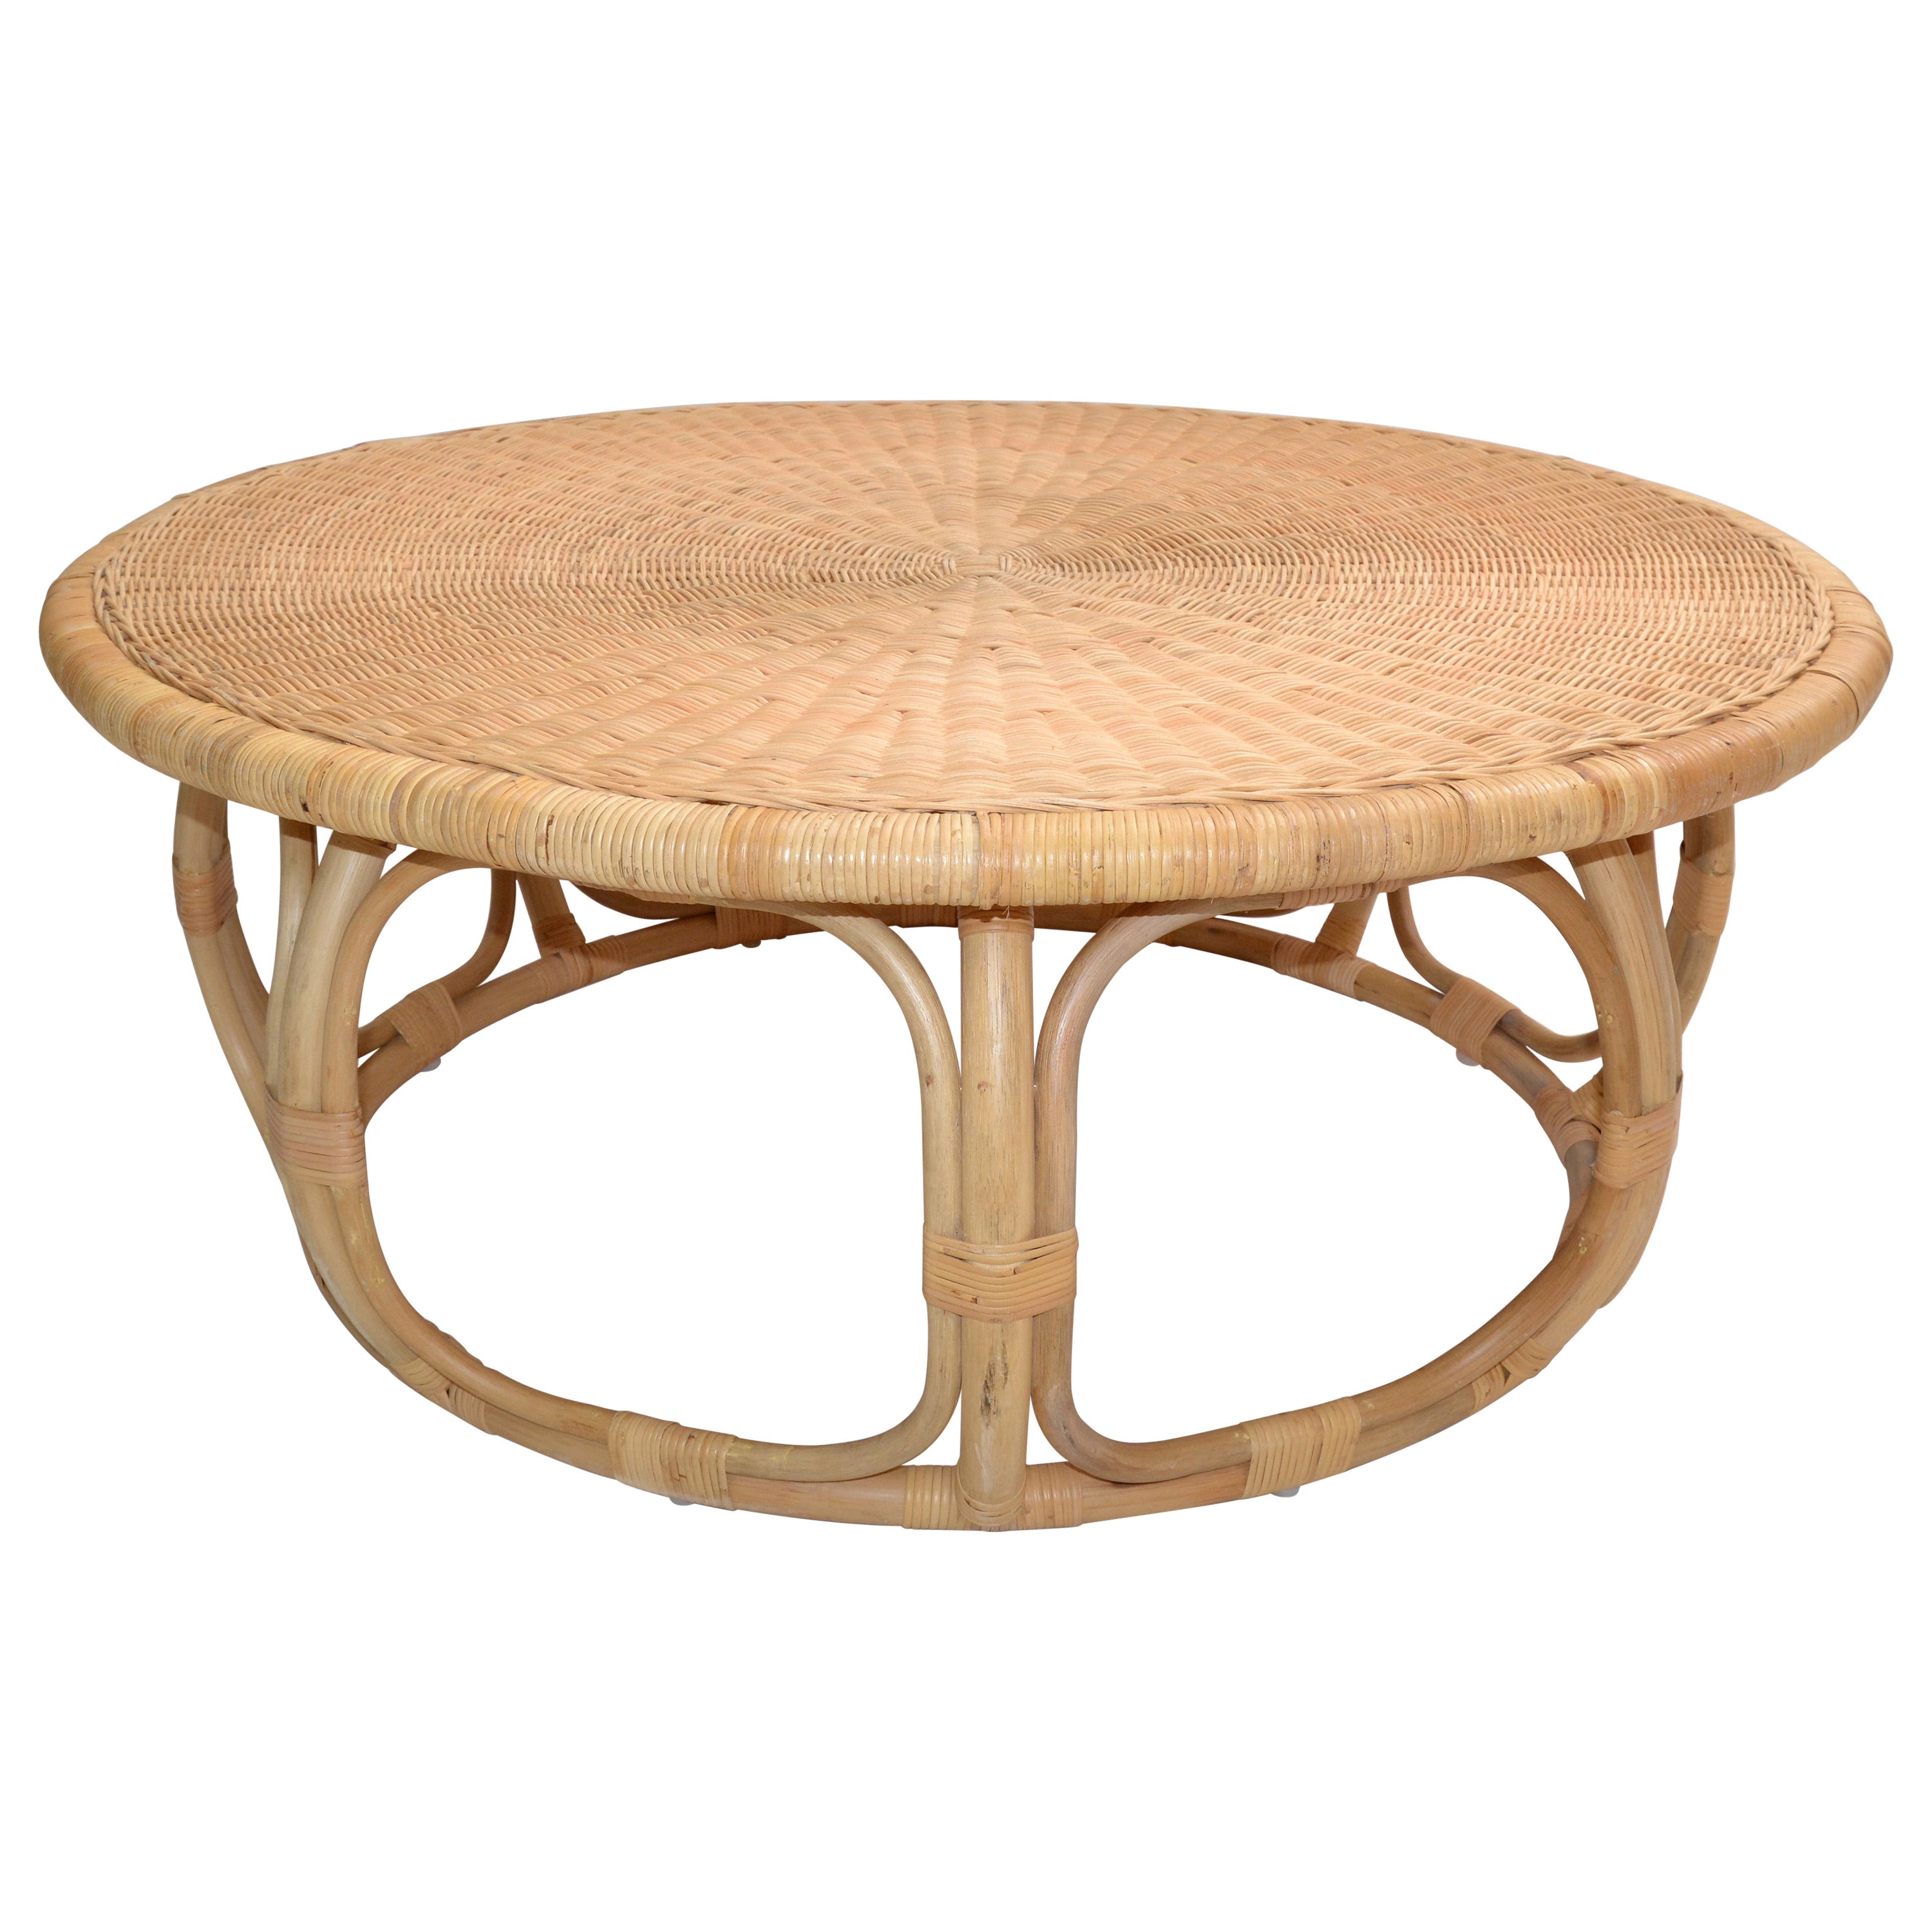 Organic Modern Round Handwoven Rattan / Wicker Coffee or Cocktail Table 1990